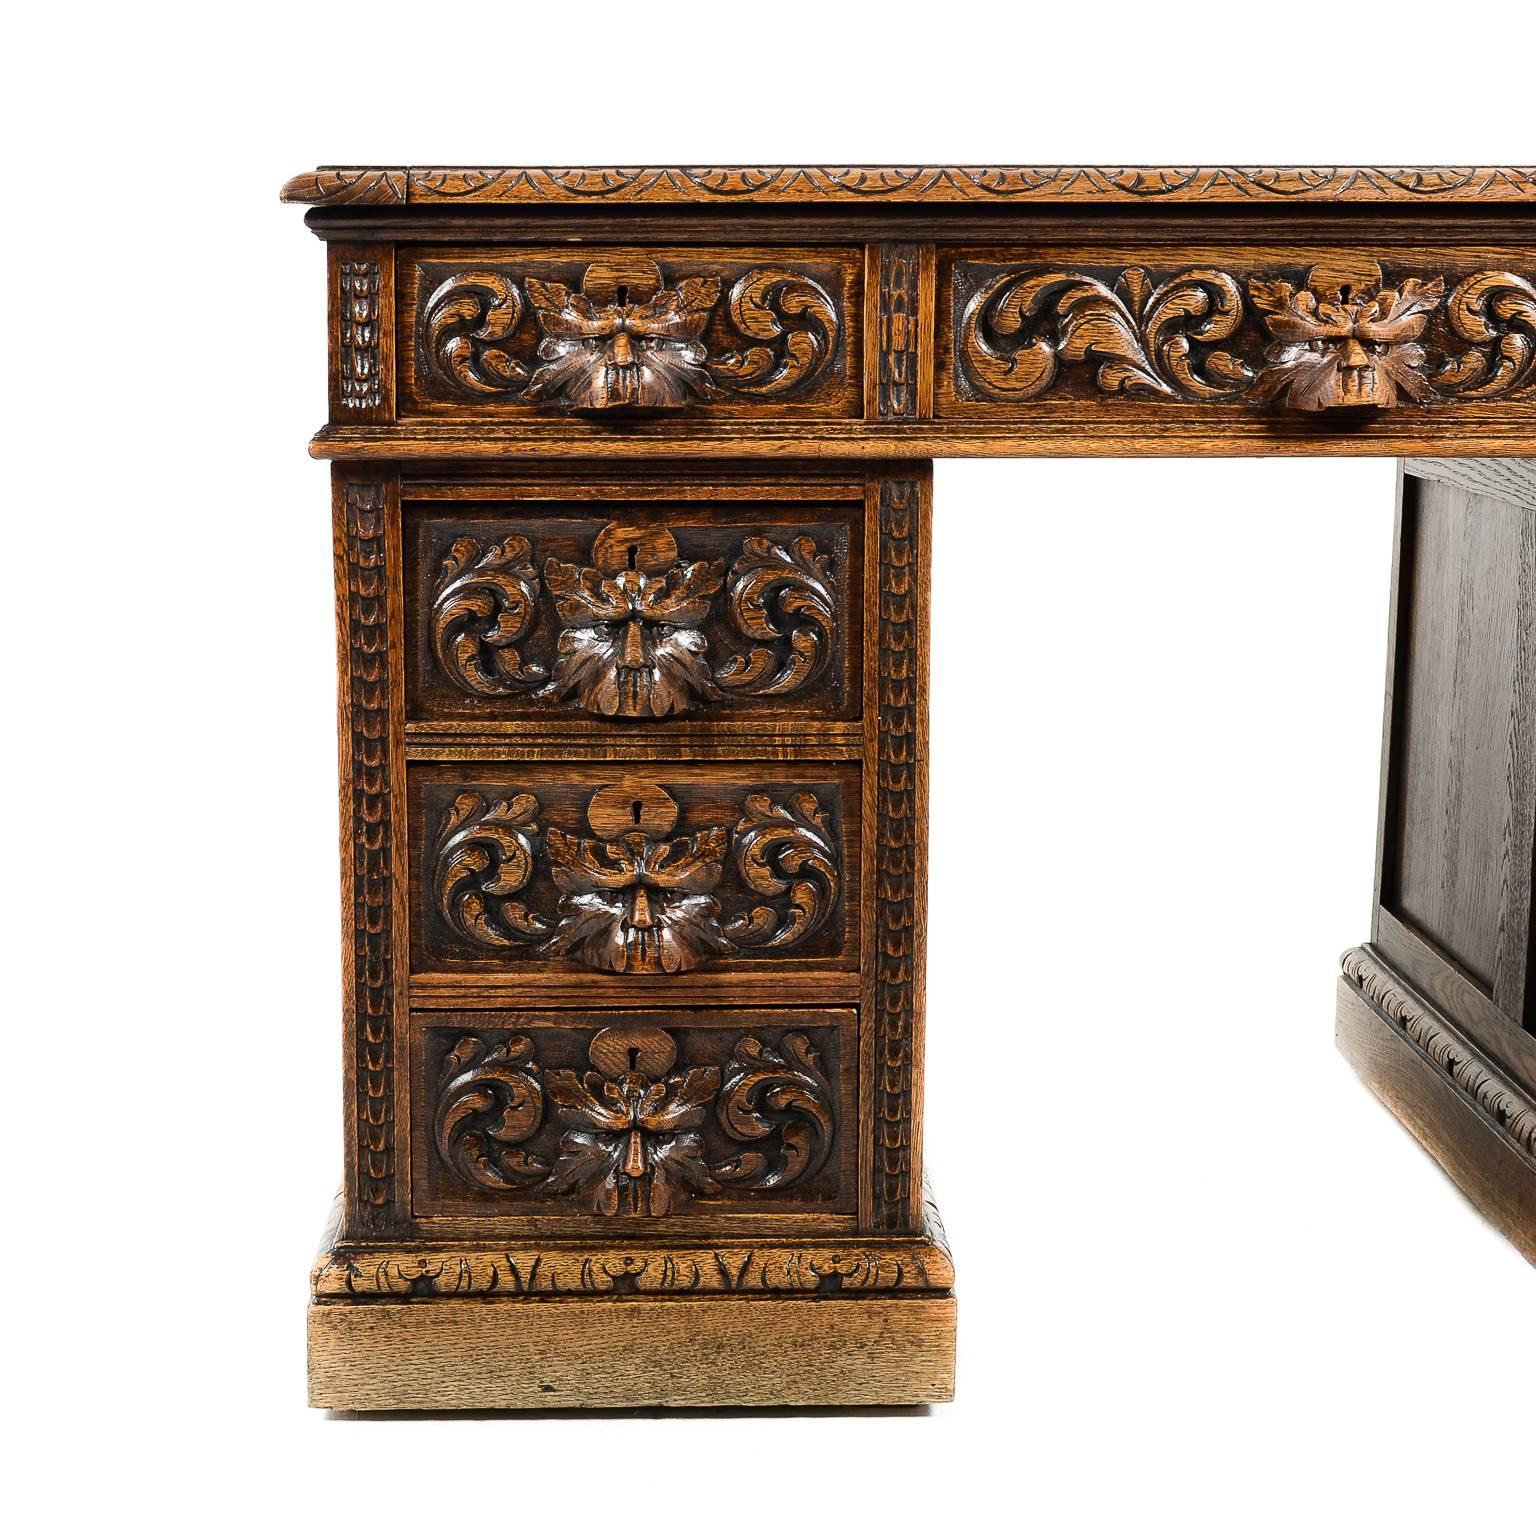 Hand-Carved Antique English Late Victorian Intricately Carved Oak Desk, 19th Century